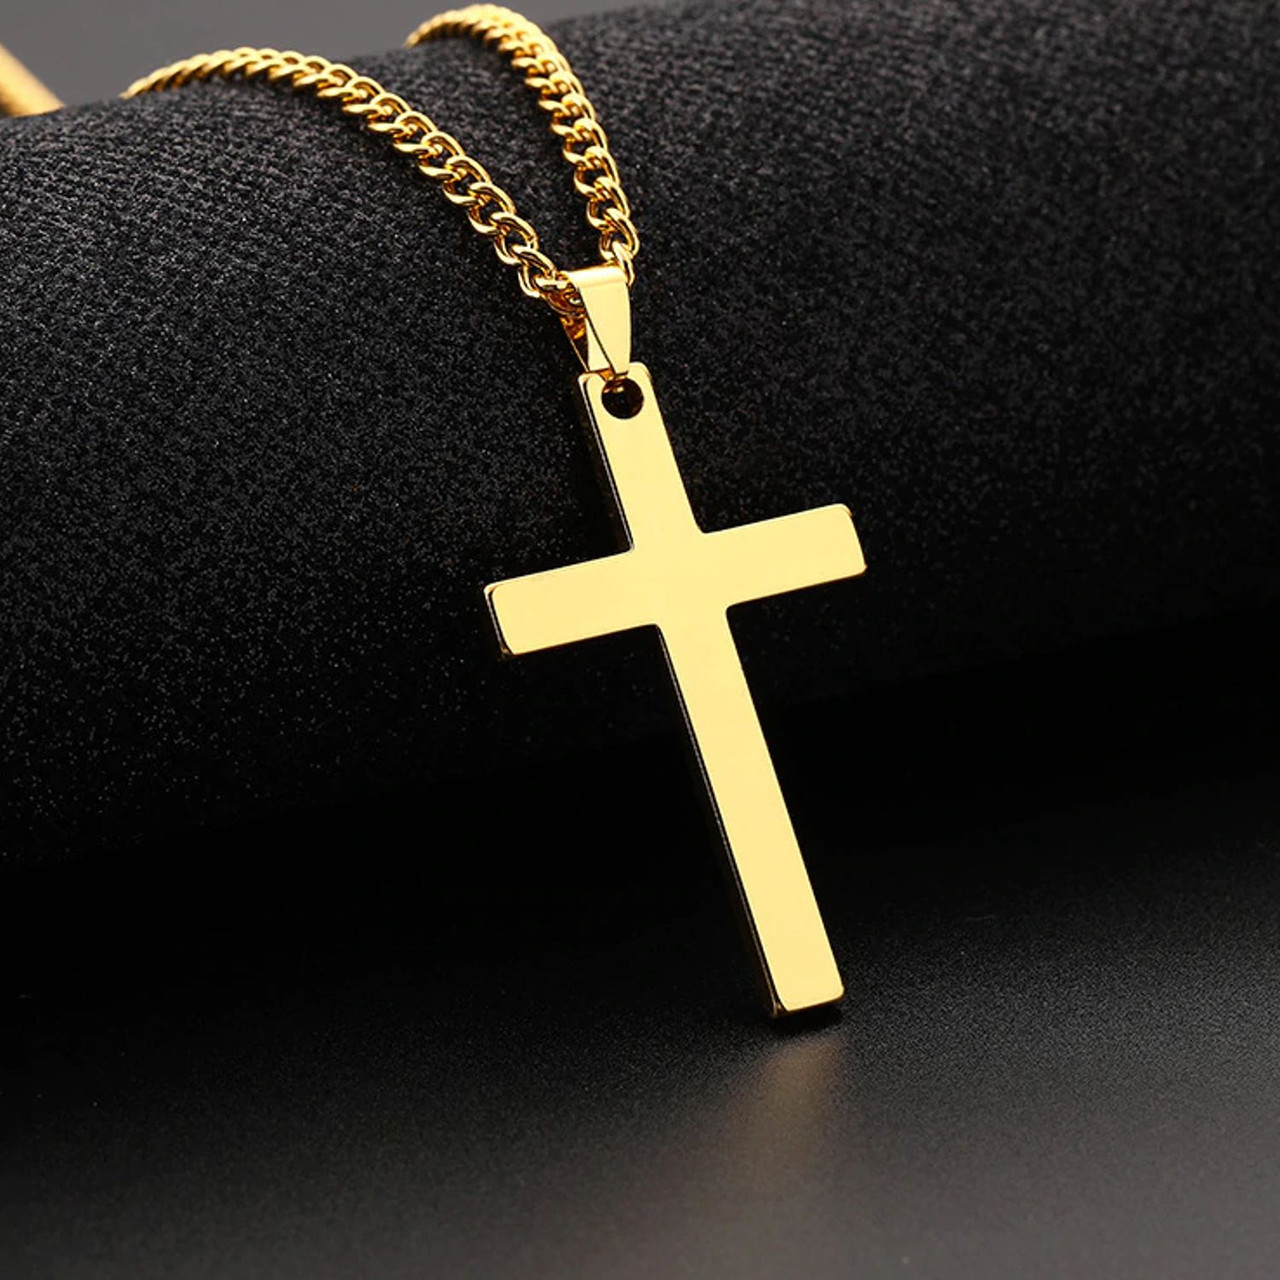 Men’s Pendant with Chain- Large Stainless Steel Cross Pendant